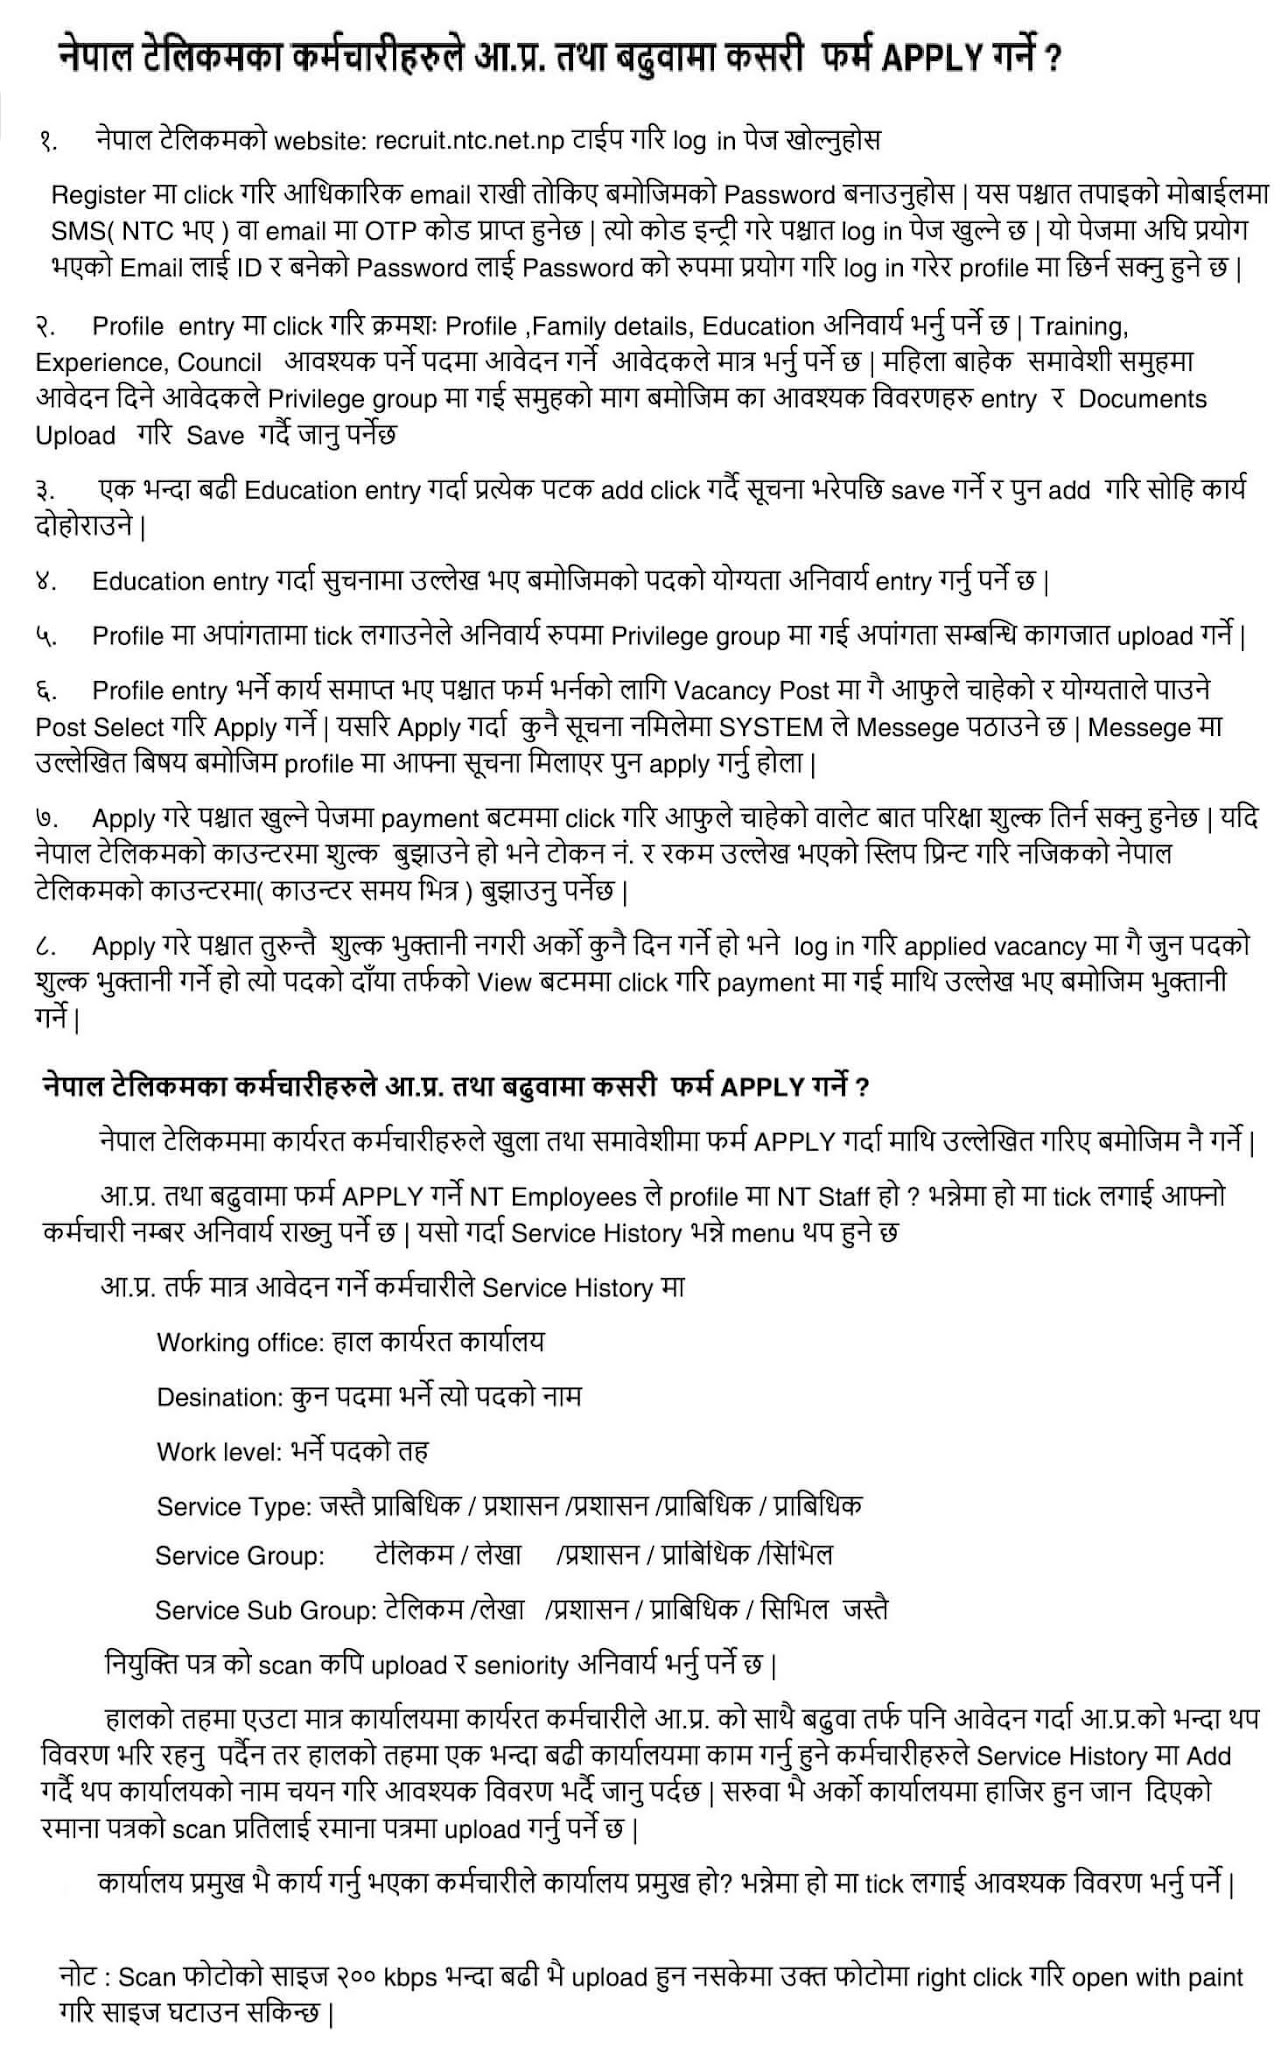 How to apply for Nepal Telecom Promotion for NT Staff